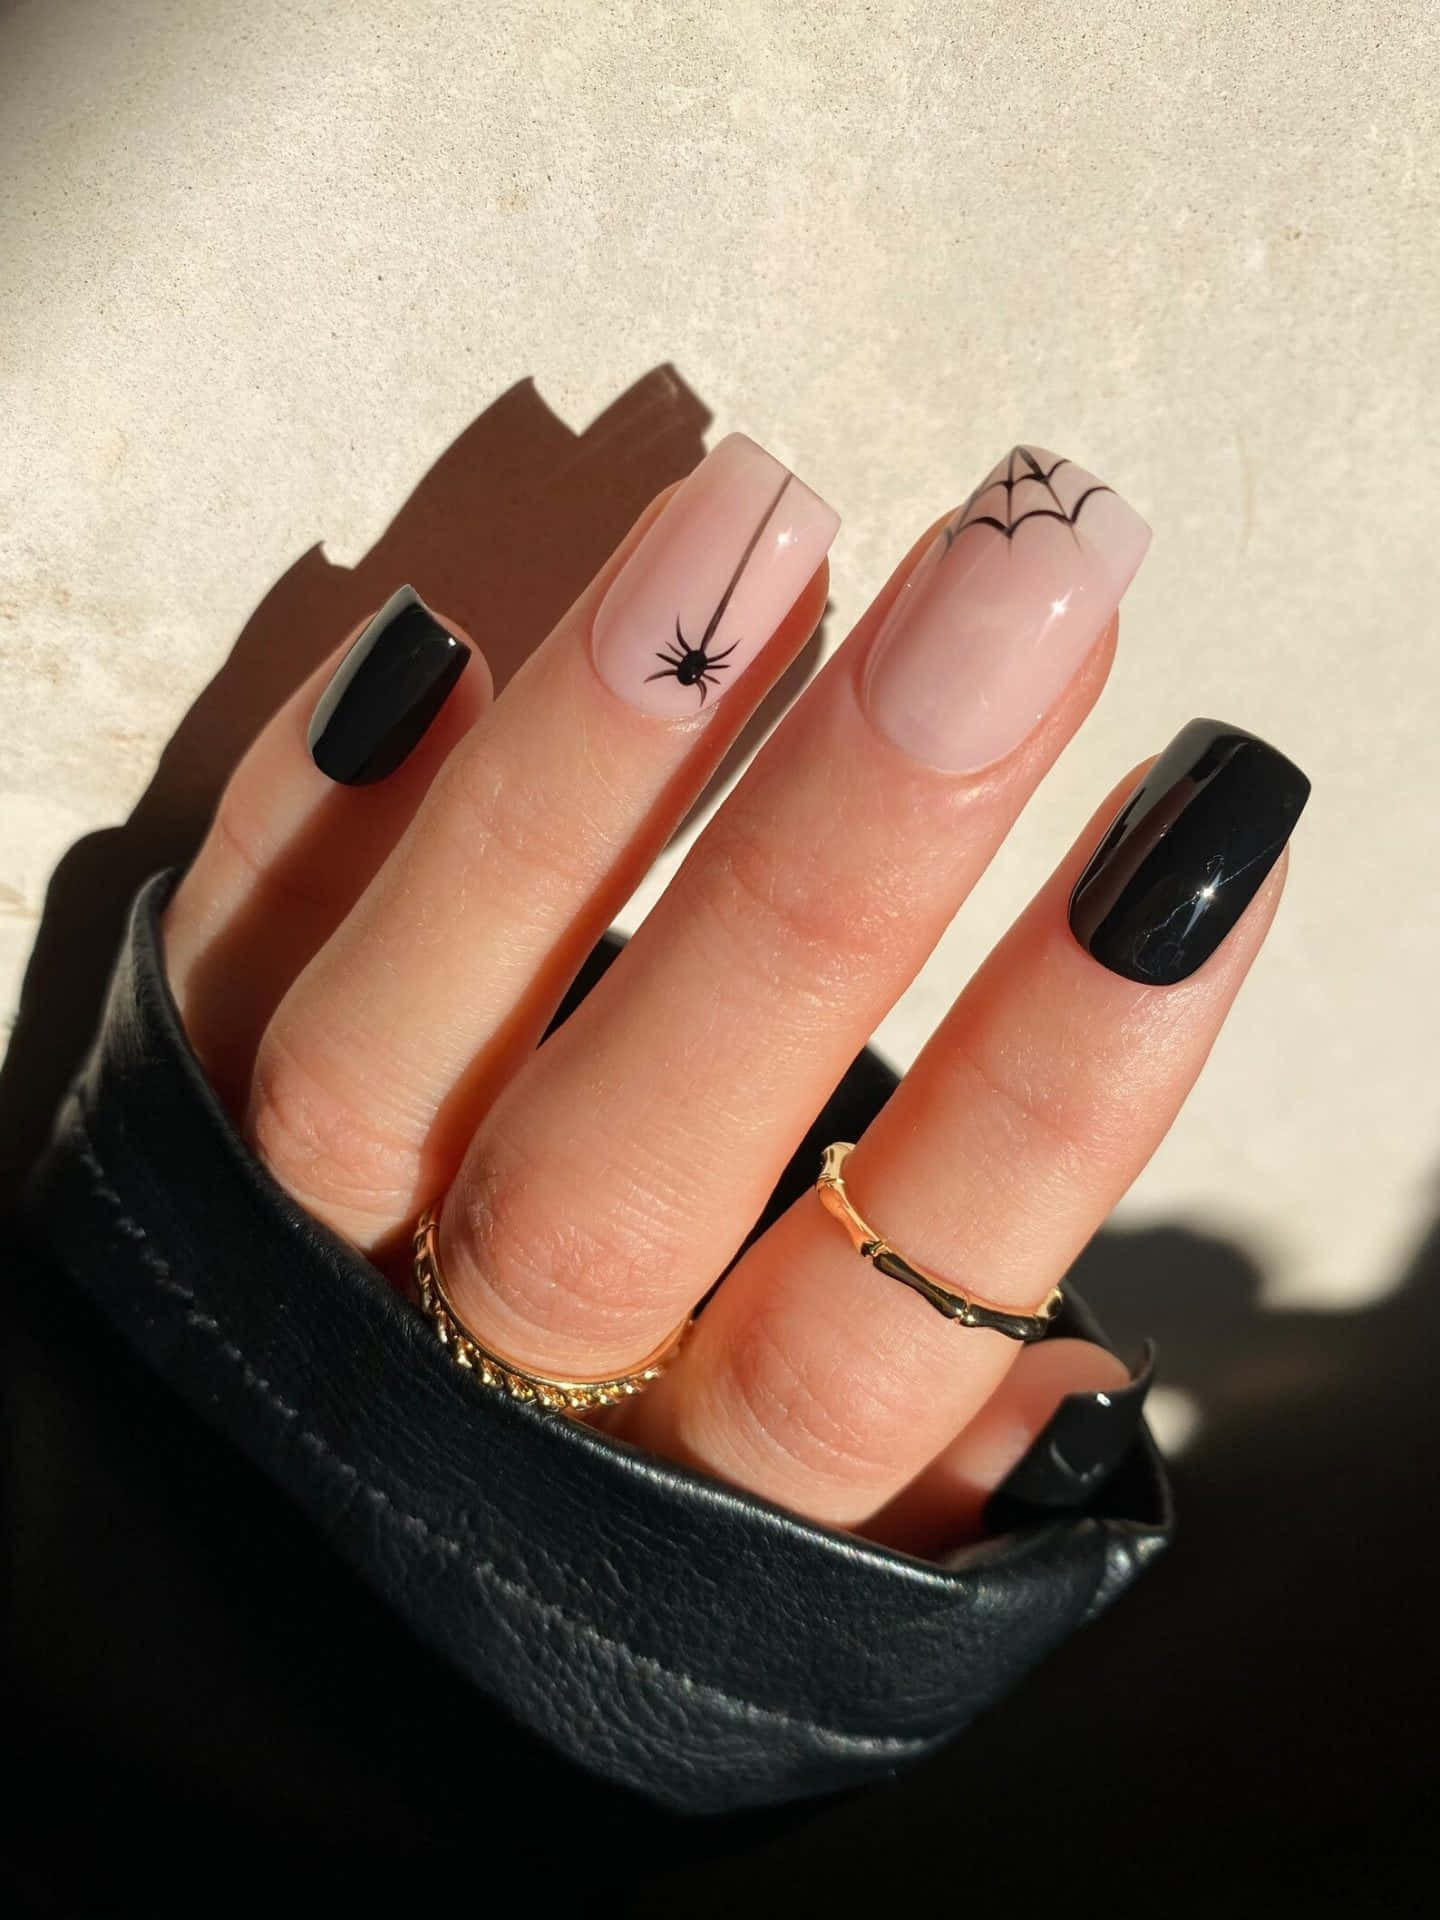 "Create a Spooky Look for Halloween with Nail Art!" Wallpaper